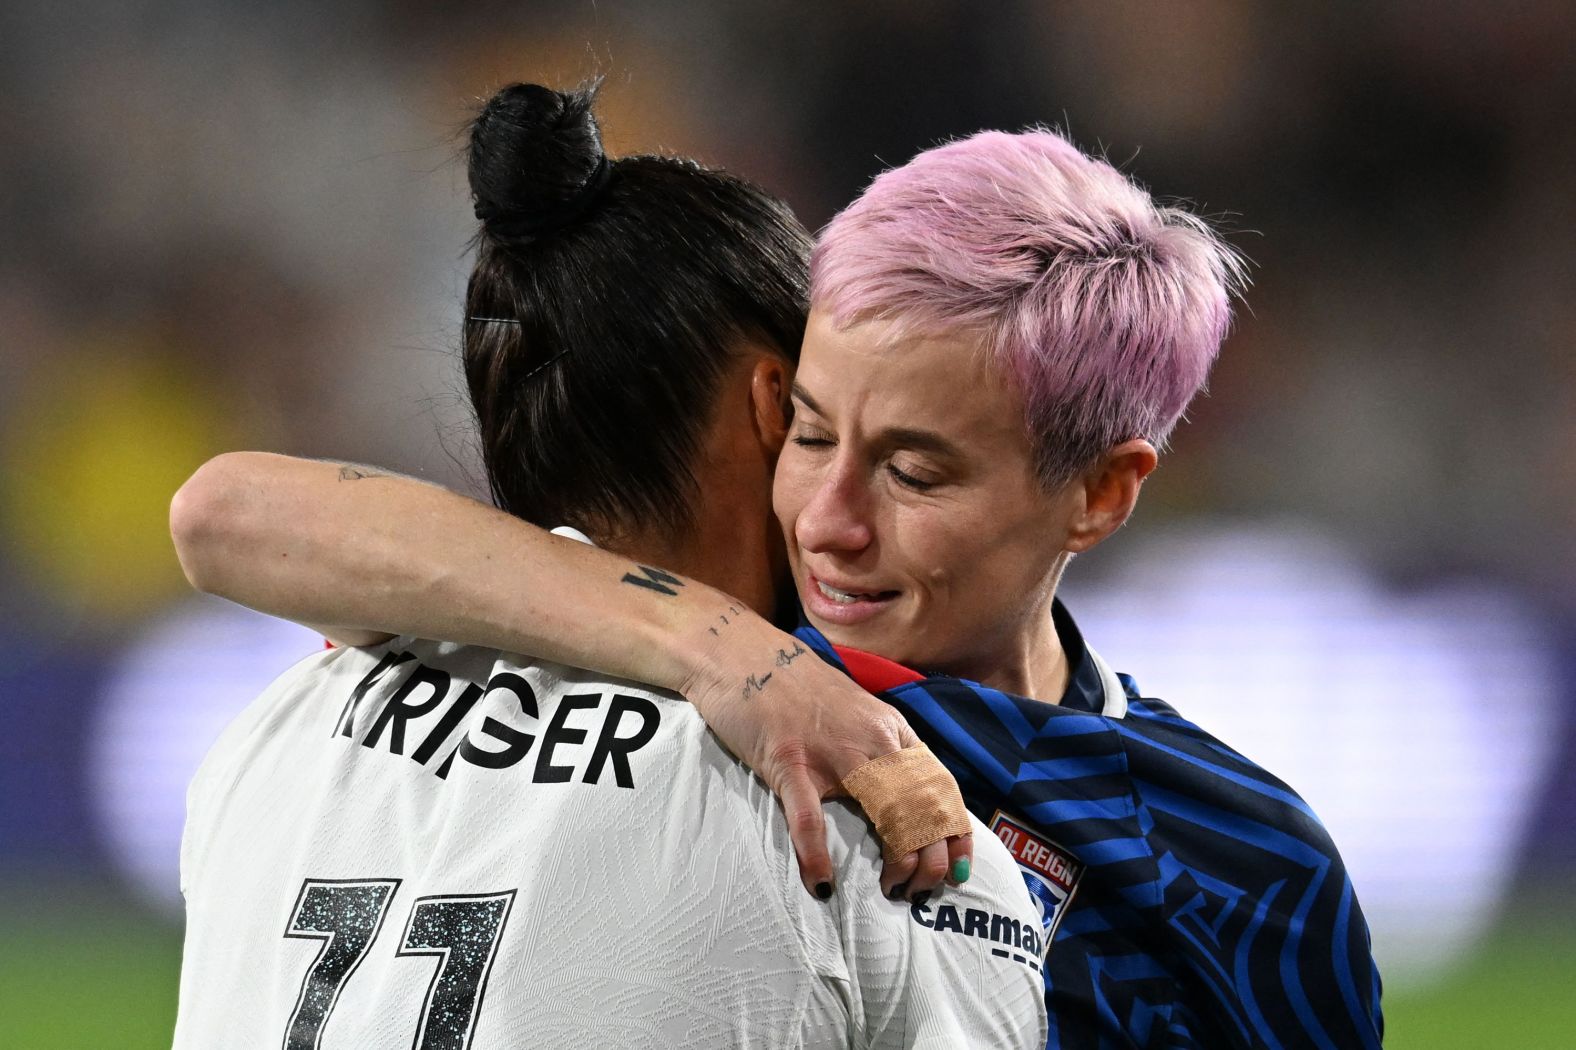 Rapinoe hugs Gotham FC's Ali Krieger during the National Women's Soccer League final match in San Diego in November 2023. Rapinoe<a href="index.php?page=&url=https%3A%2F%2Fwww.cnn.com%2F2023%2F11%2F11%2Fsport%2Fmegan-rapinoe-ali-krieger-nwsl-final-spt-intl%2Findex.html" target="_blank"> limped out of the final game of her storied career</a>, suffering an apparent ankle injury less than three minutes into the match. Krieger, another US soccer legend and Rapinoe's longtime teammate on the US Women's National Team, also announced her retirement from professional soccer at the end of the 2023 NWSL season.